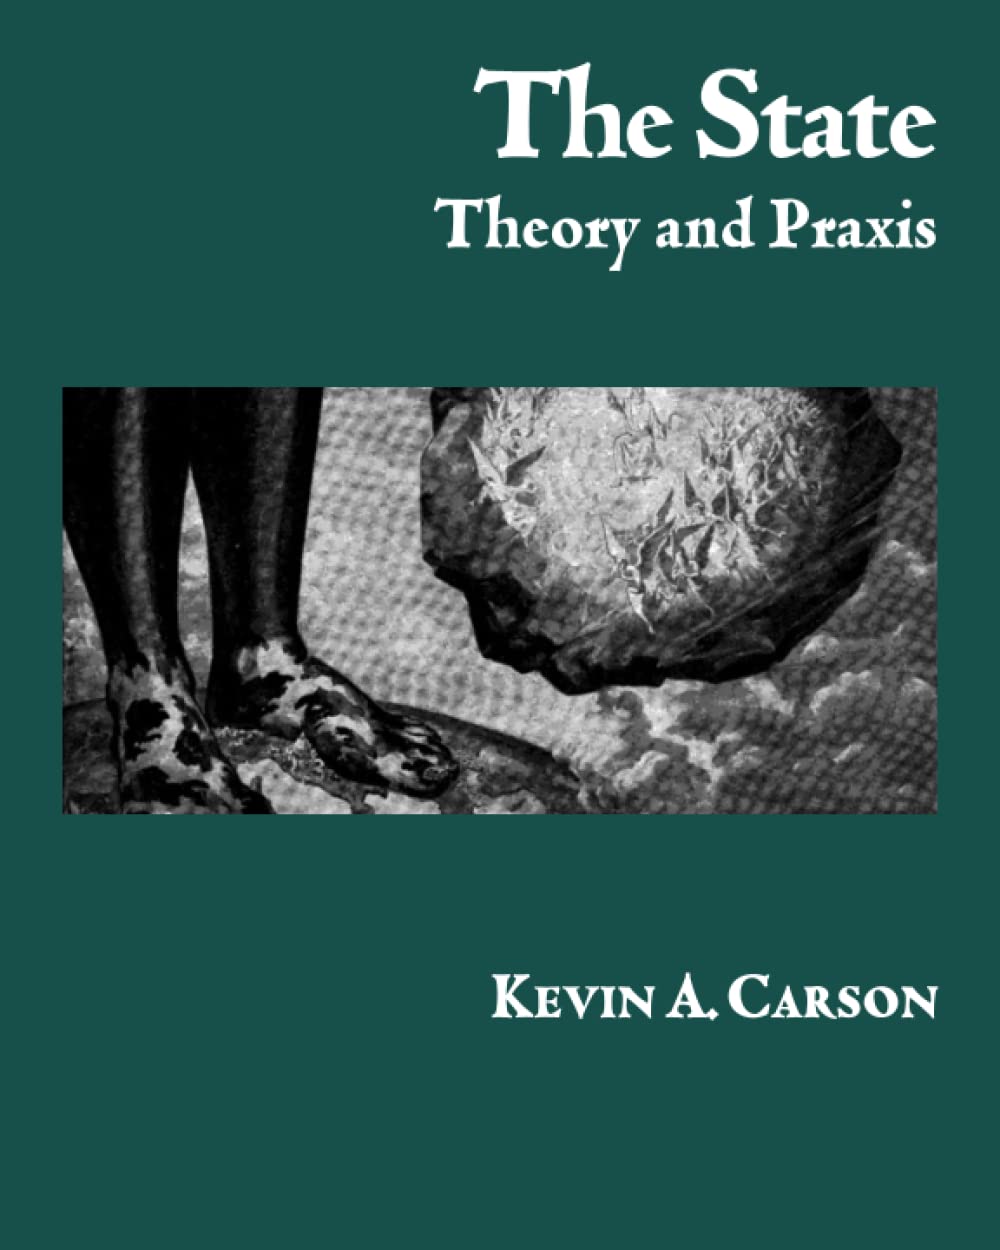 Kevin Carson’s The State: Theory and Praxis on Amazon